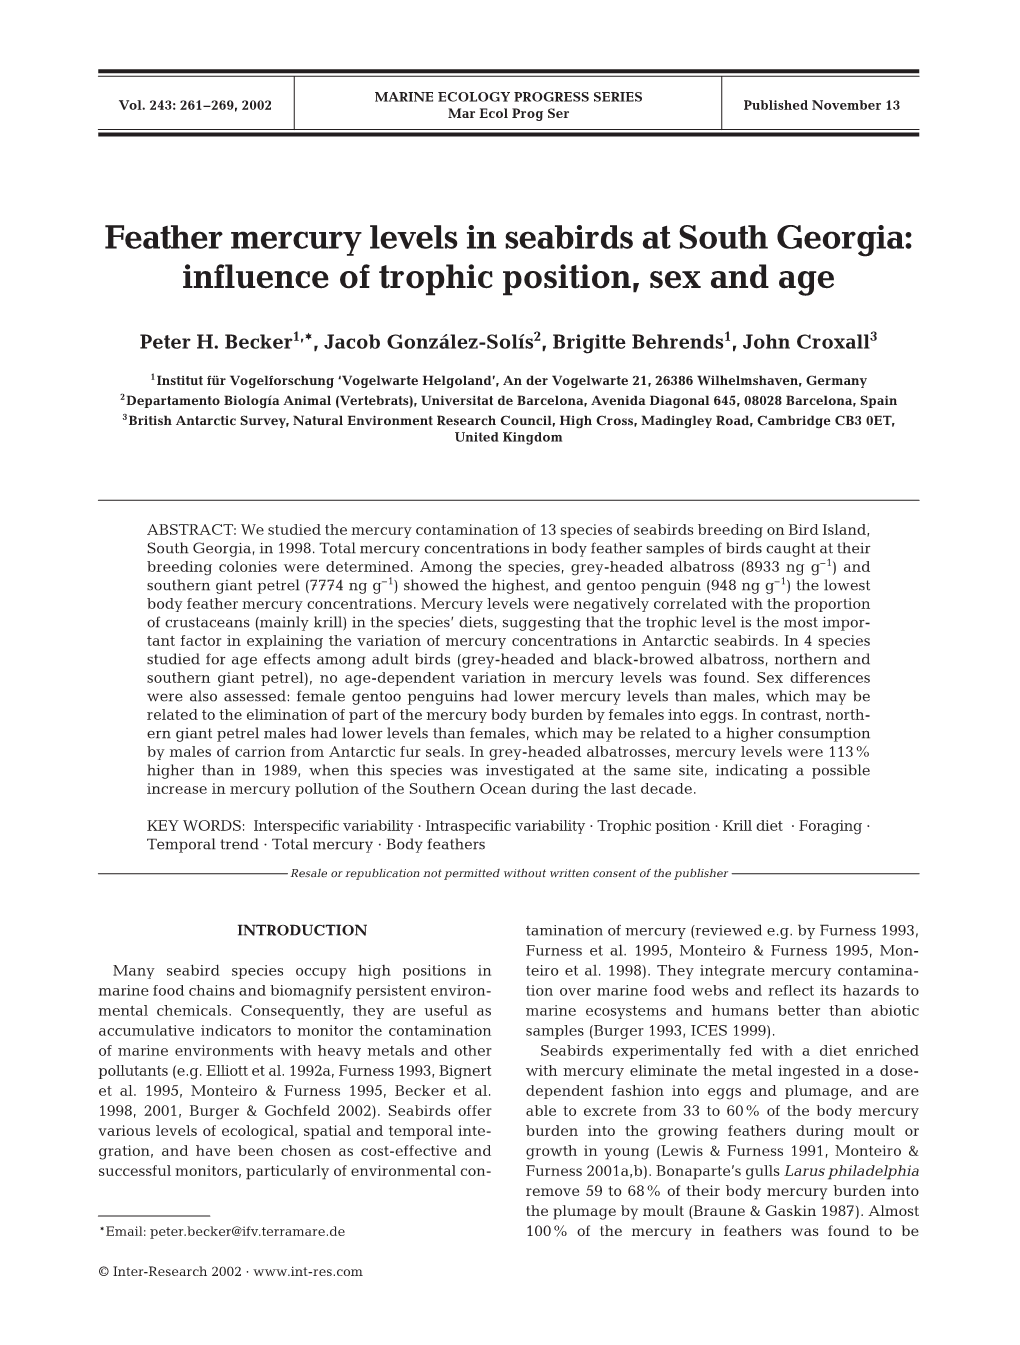 Feather Mercury Levels in Seabirds at South Georgia: Influence of Trophic Position, Sex and Age